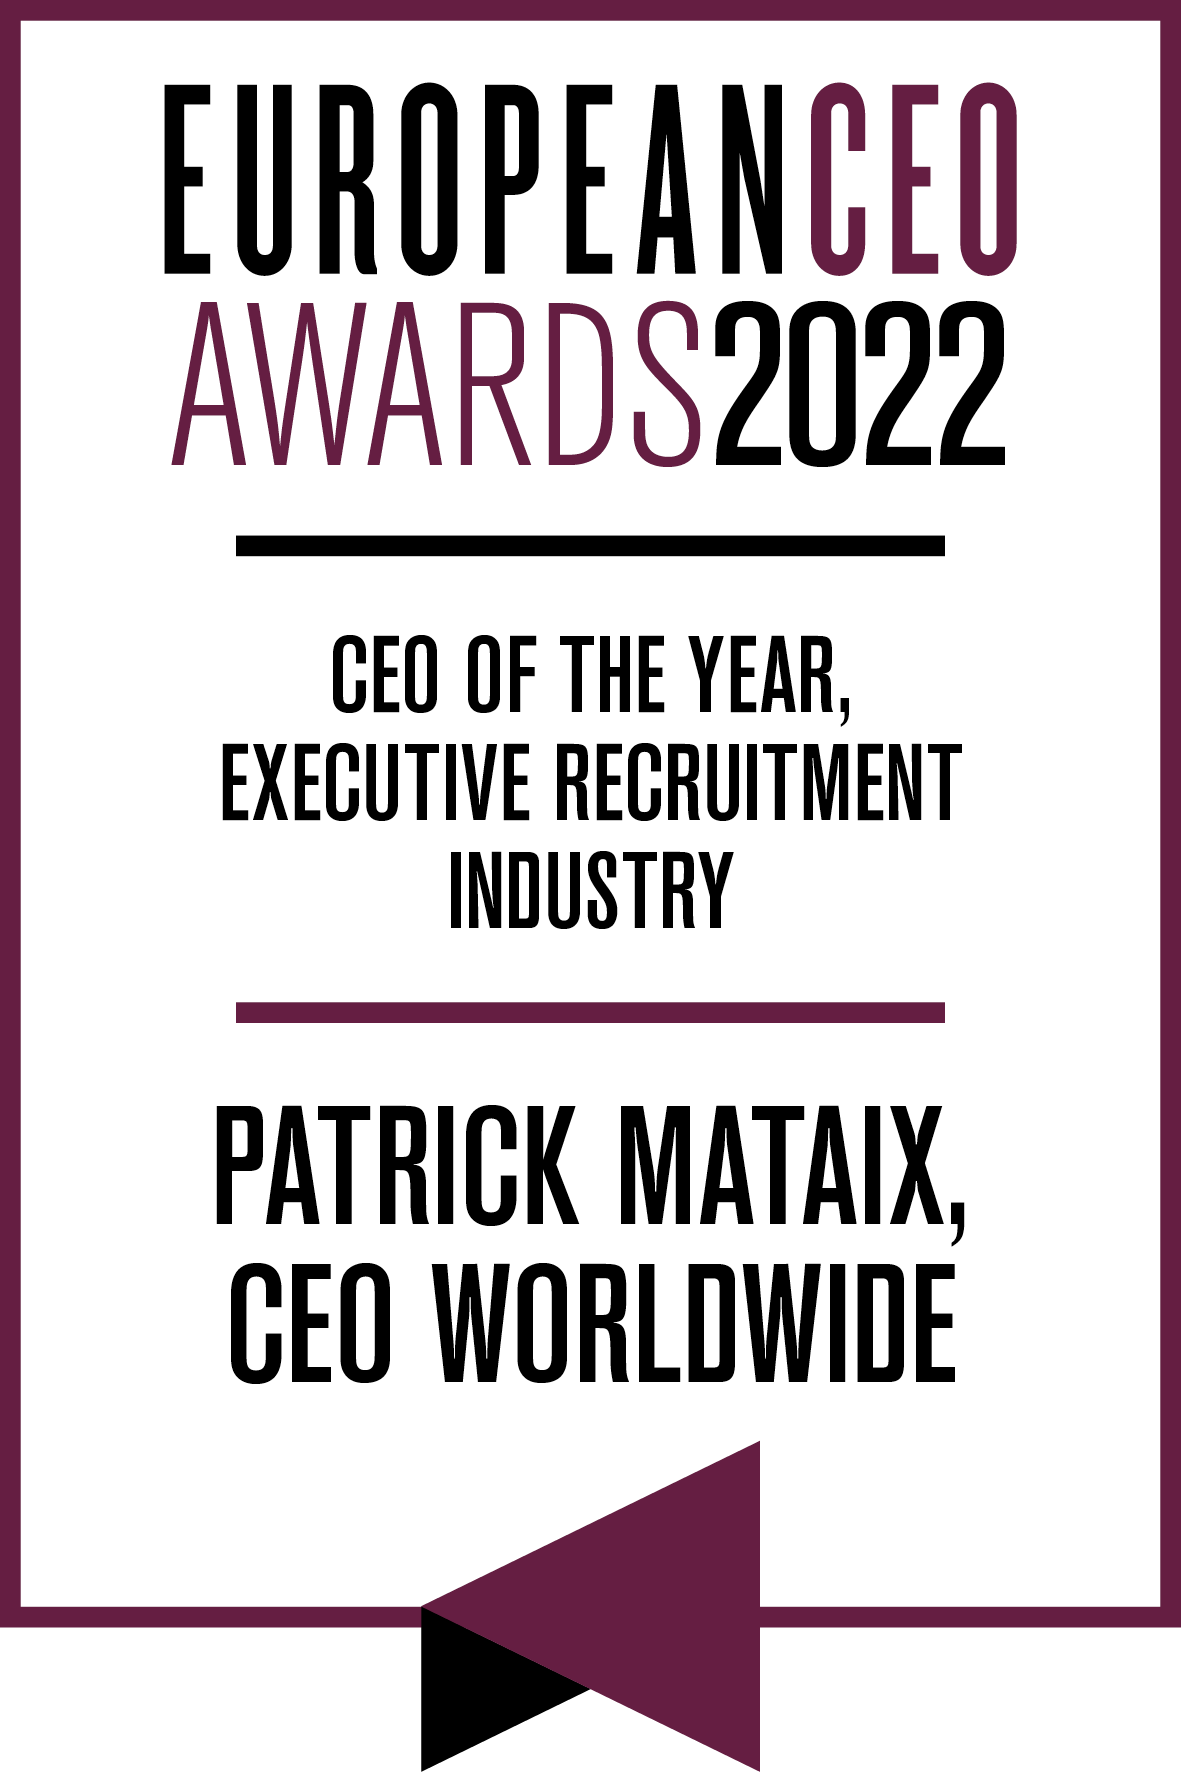 CEO of the Year, Executive Recruitment Industry